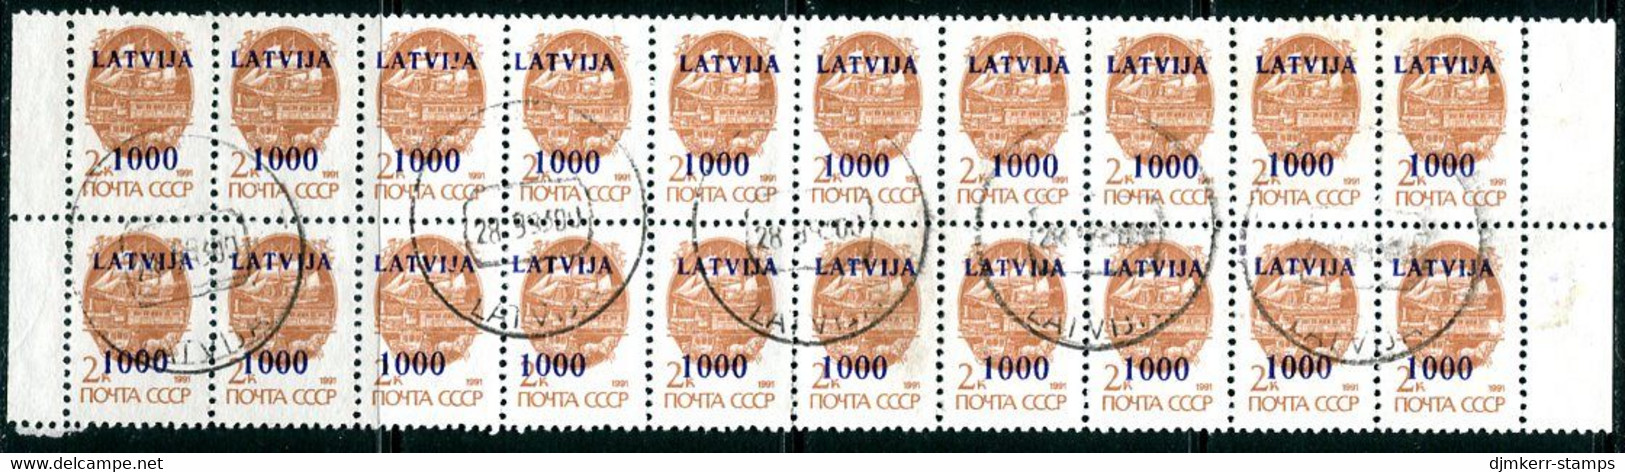 LATVIA 1991 Provisional Surcharges I 1000 K. Block Of 20 Used.  Michel 316 - Lettonie